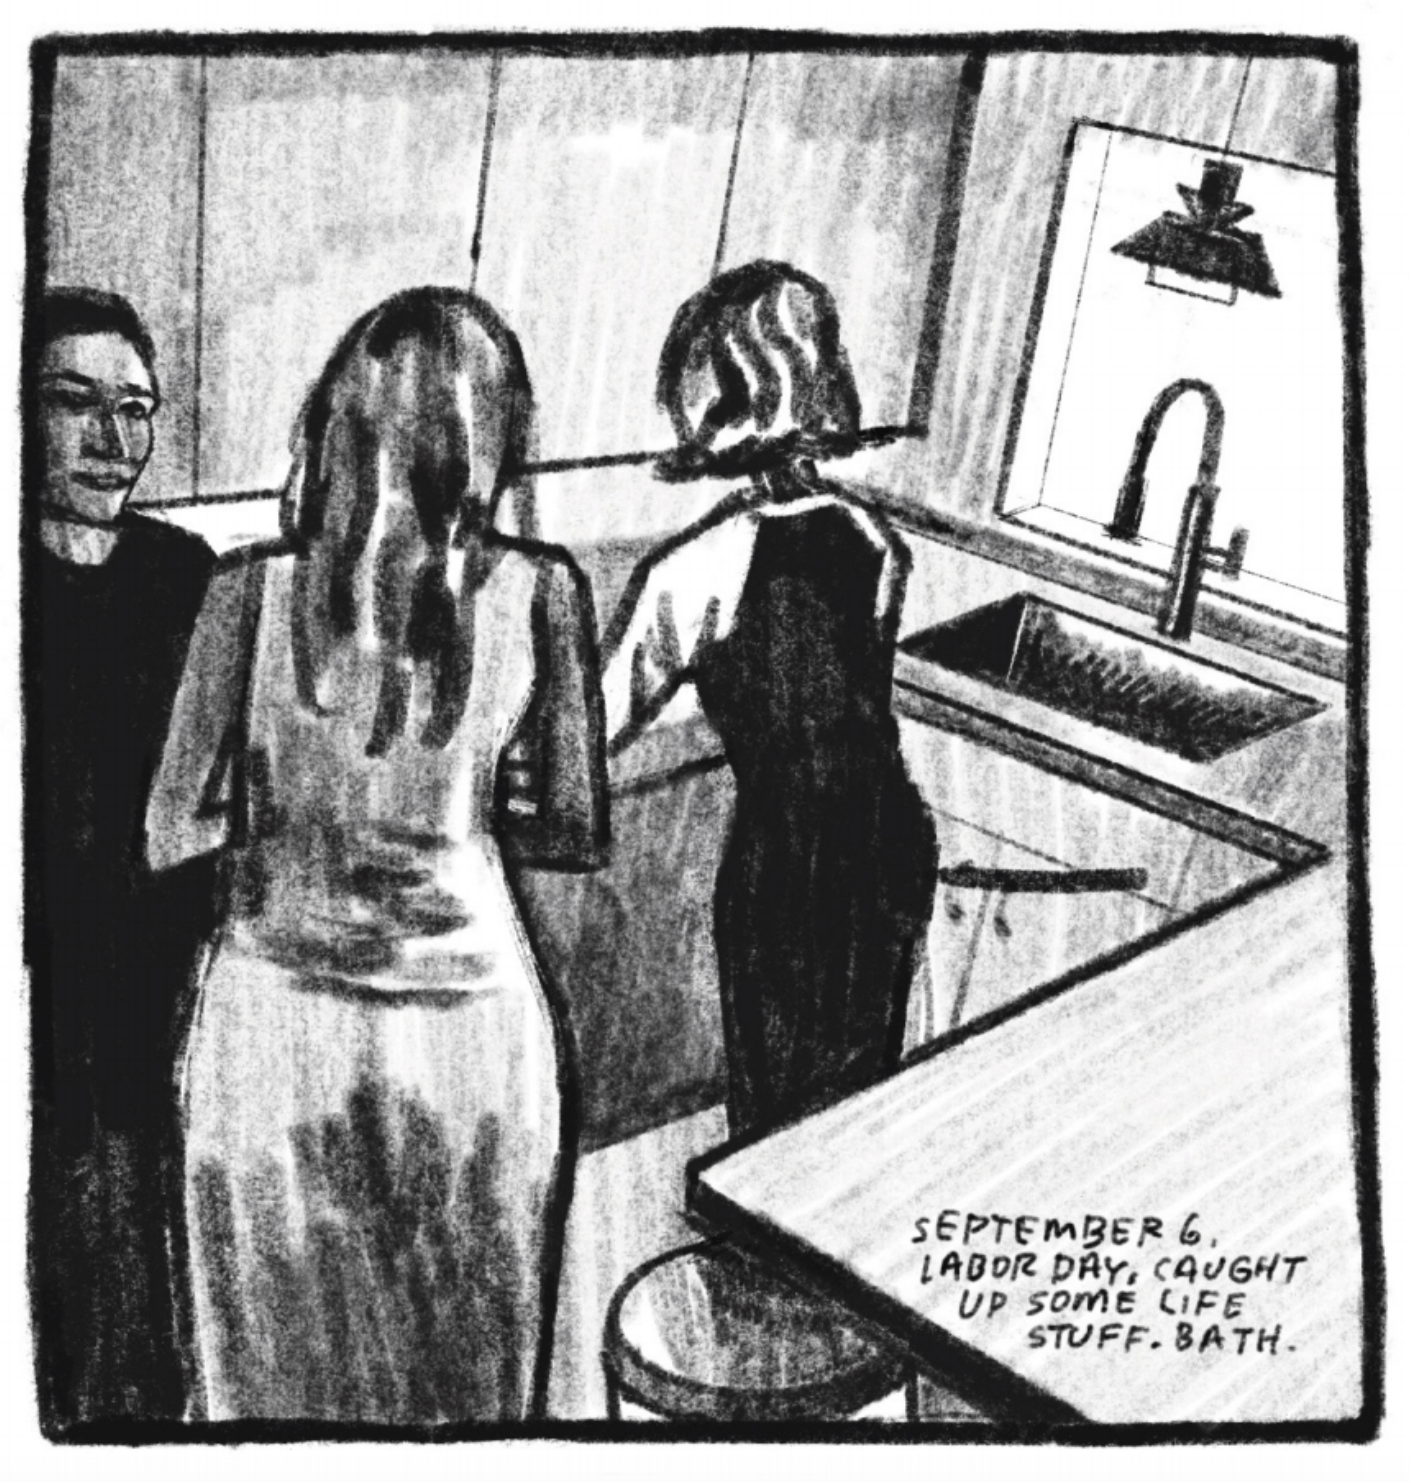 Kim stands at her kitchen counter (inside the U shape). There are two other adults standing to her left, chatting. â€œSeptember 6. Labor Day. Caught up some life stuff. Bath.â€